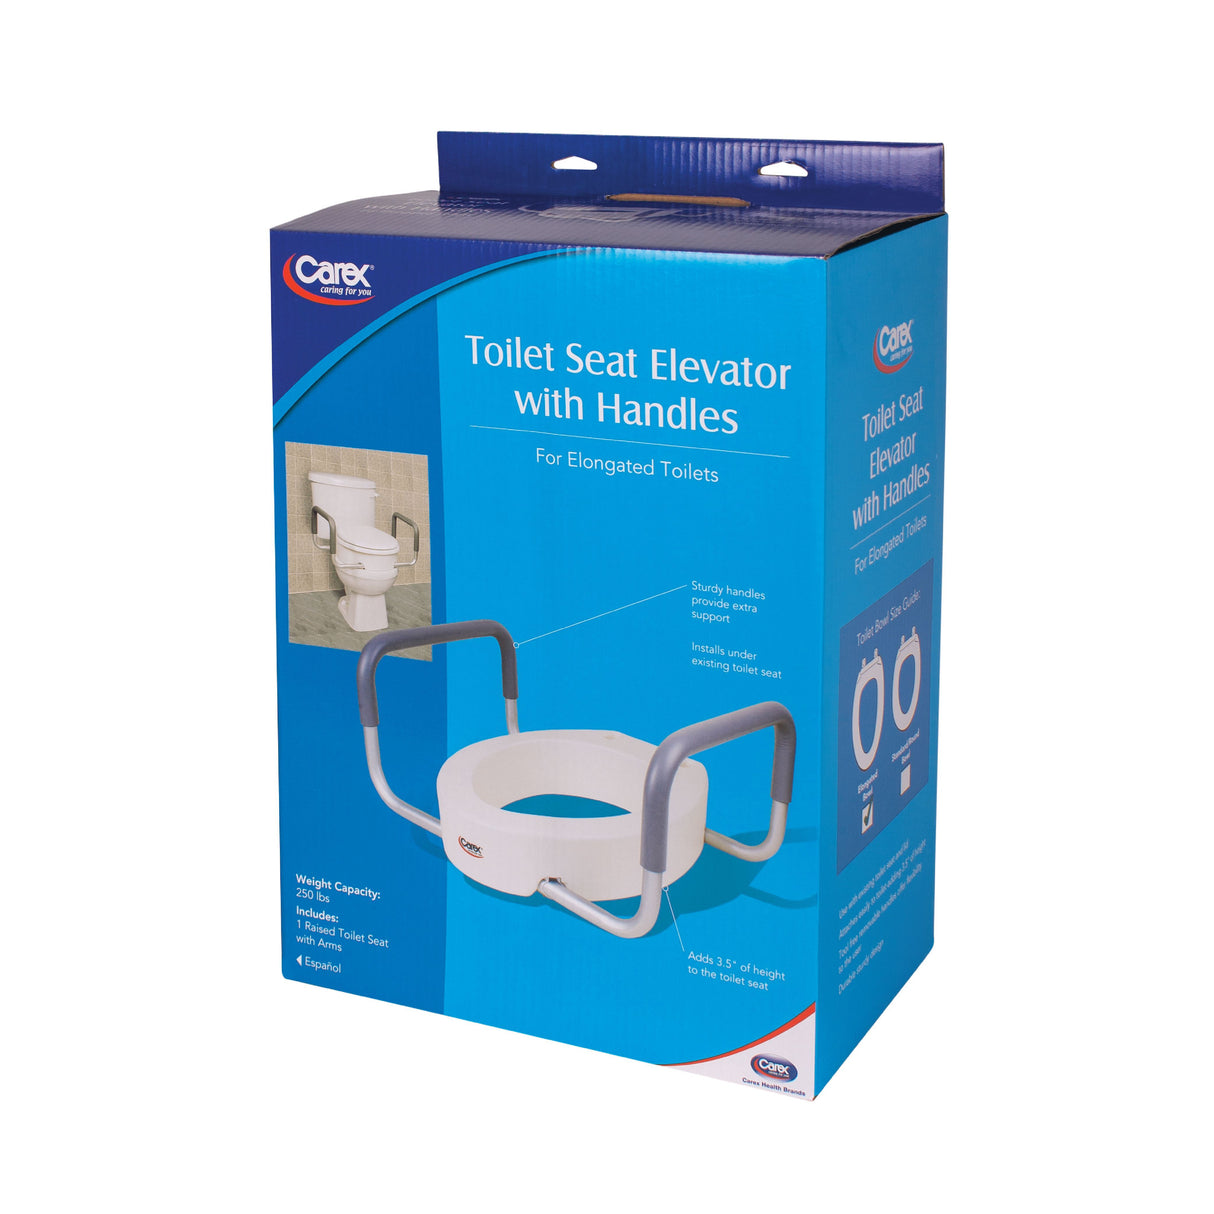 https://www.saveritemedical.com/cdn/shop/products/carexr-toilet-seat-elevator-with-handles-for-elongated-toilets-3-12-h-carex-health-brands-576440.jpg?v=1631423846&width=1214